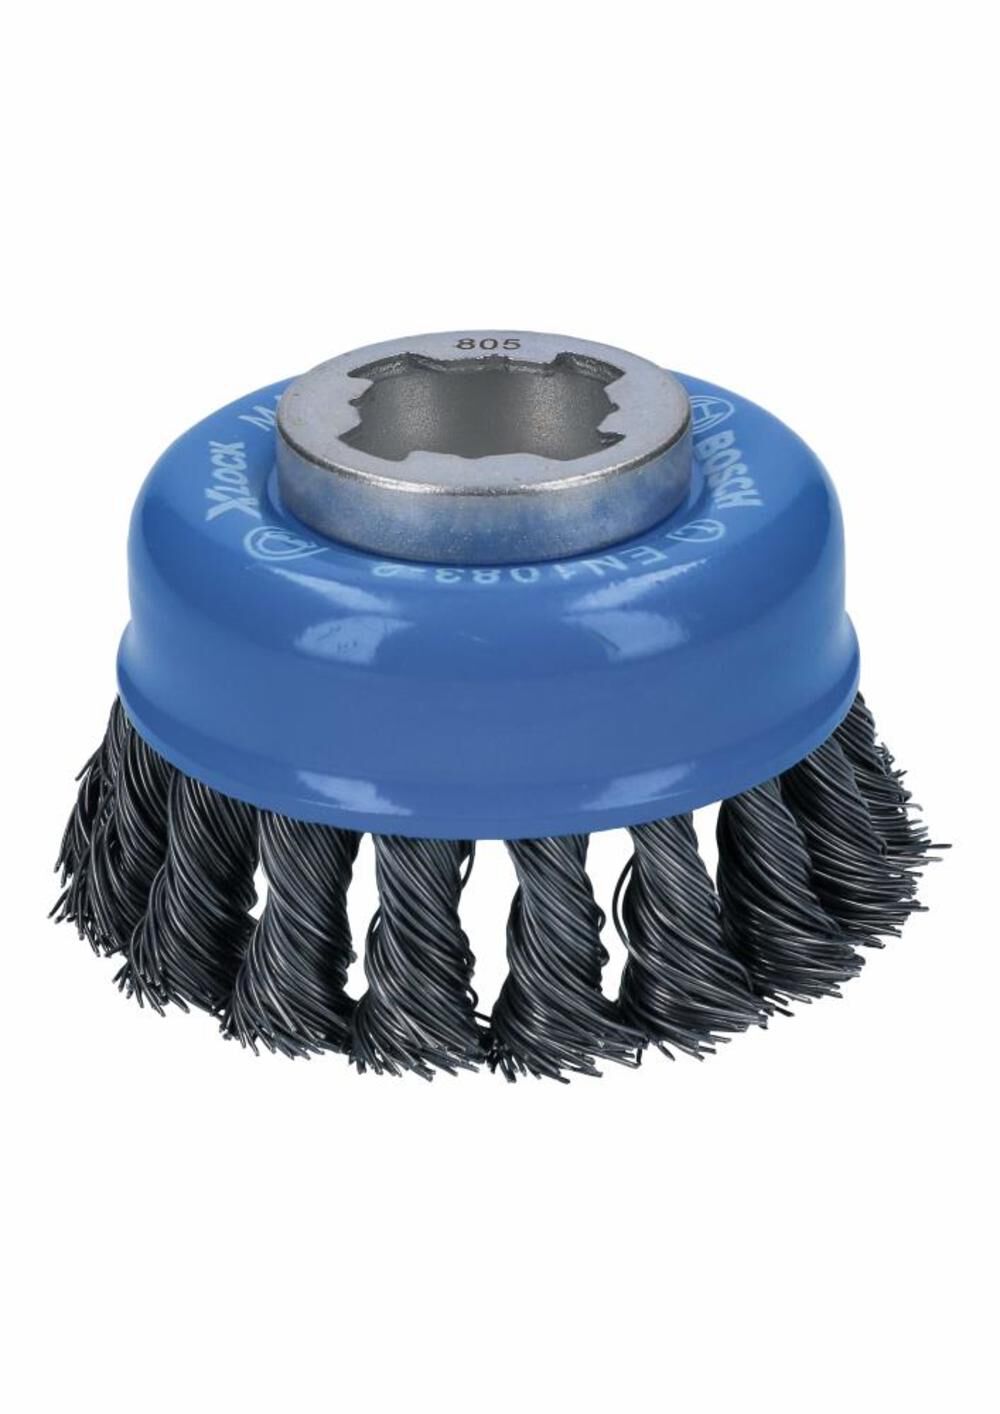 BOSCH 3" Wheel Dia. X-LOCK Arbor Carbon Steel Knotted Wire Single Row Cup Brush (5 PACK)